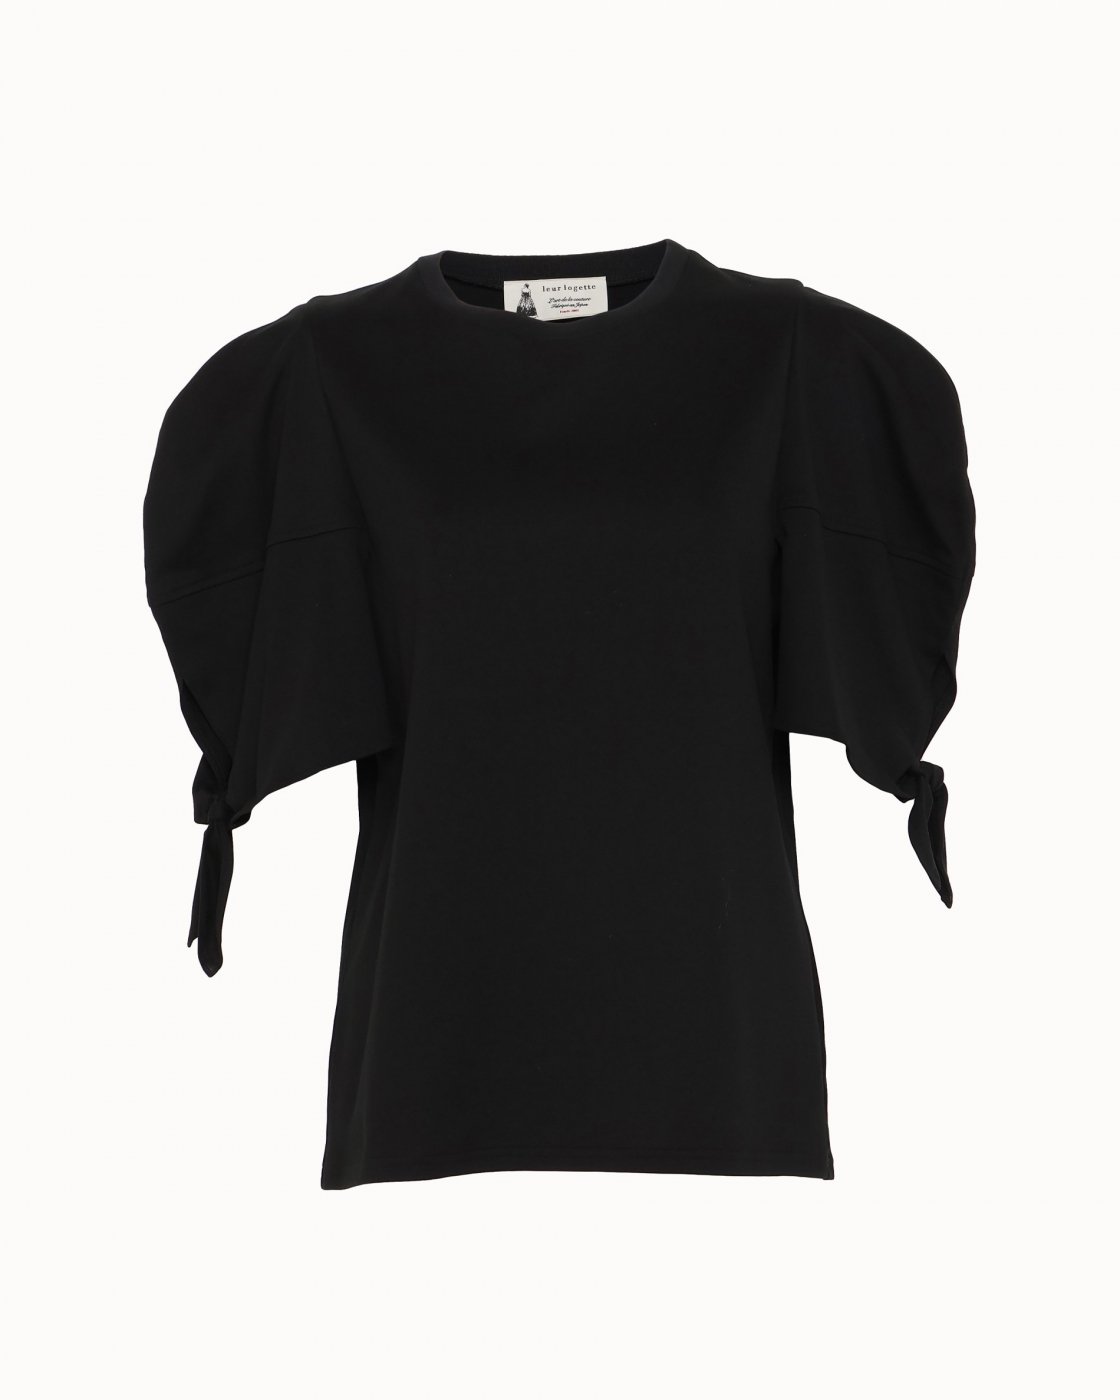 leur logette - <img class='new_mark_img1' src='https://img.shop-pro.jp/img/new/icons1.gif' style='border:none;display:inline;margin:0px;padding:0px;width:auto;' />Lotus Short Sleeve Tops - Black